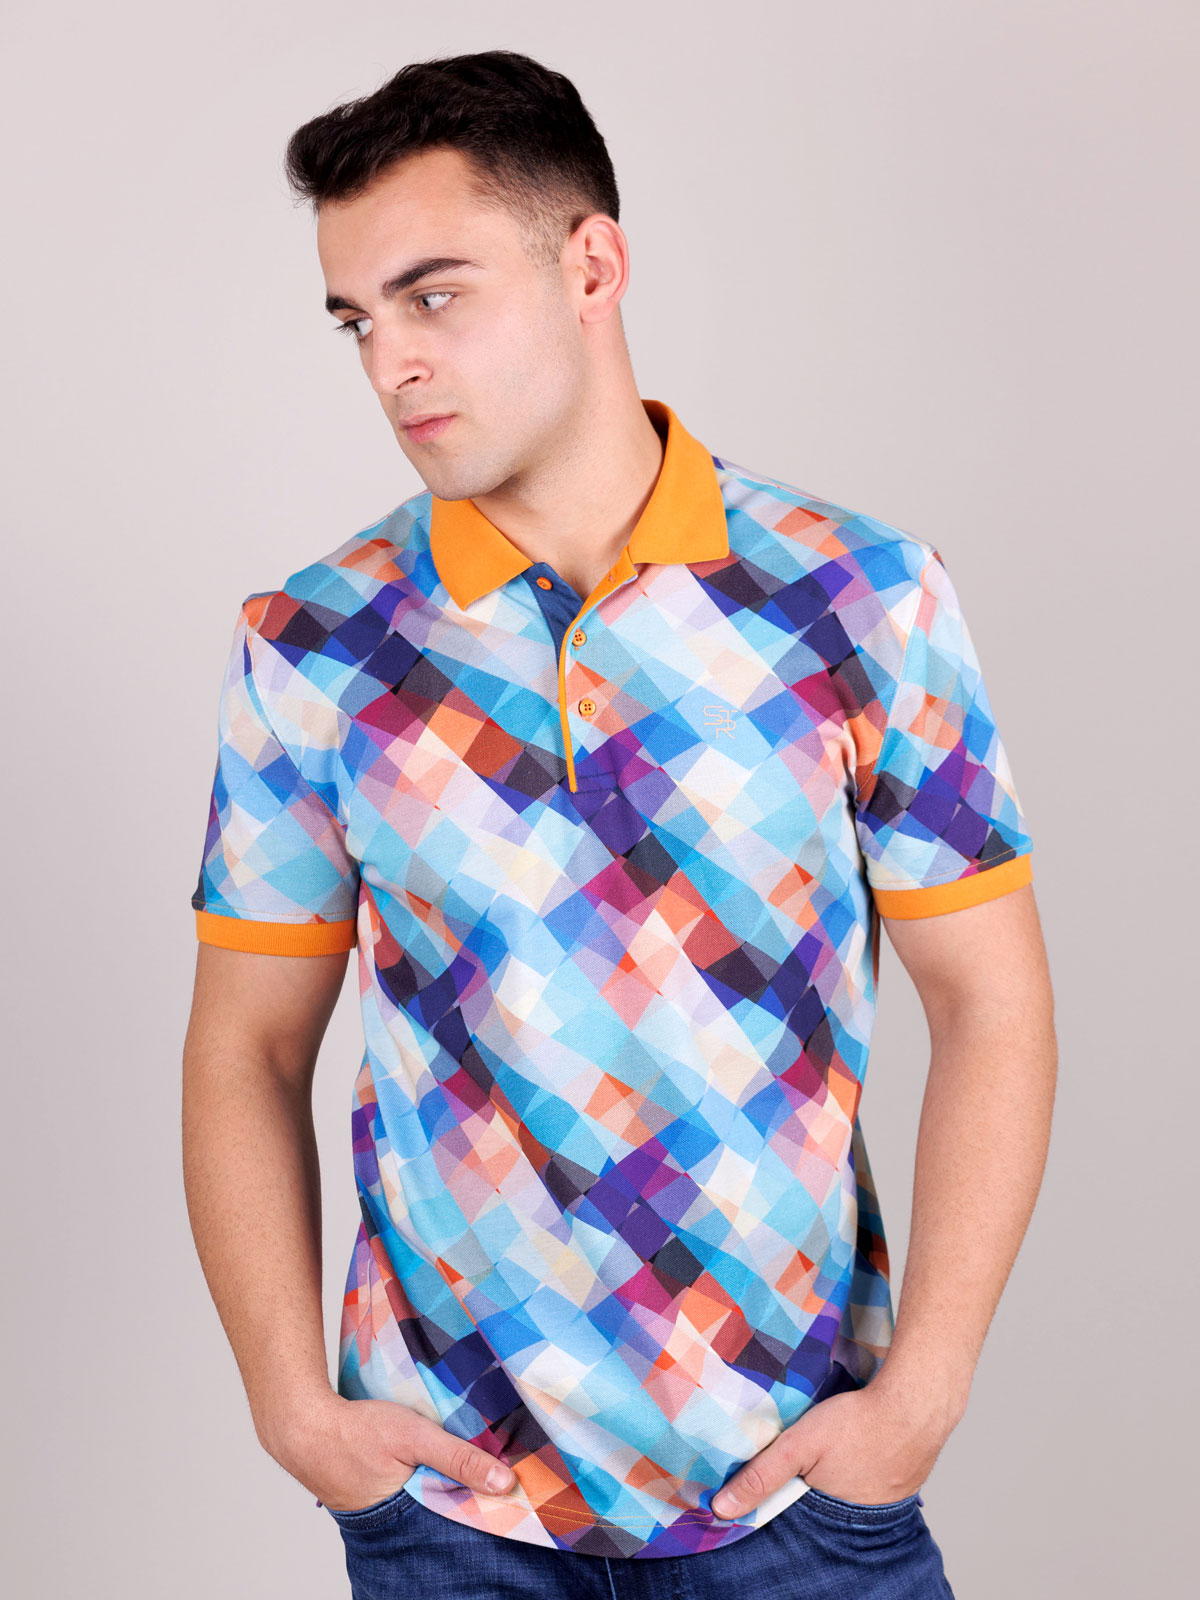 Tshirt with multicolored squares - 93428 € 40.49 img4